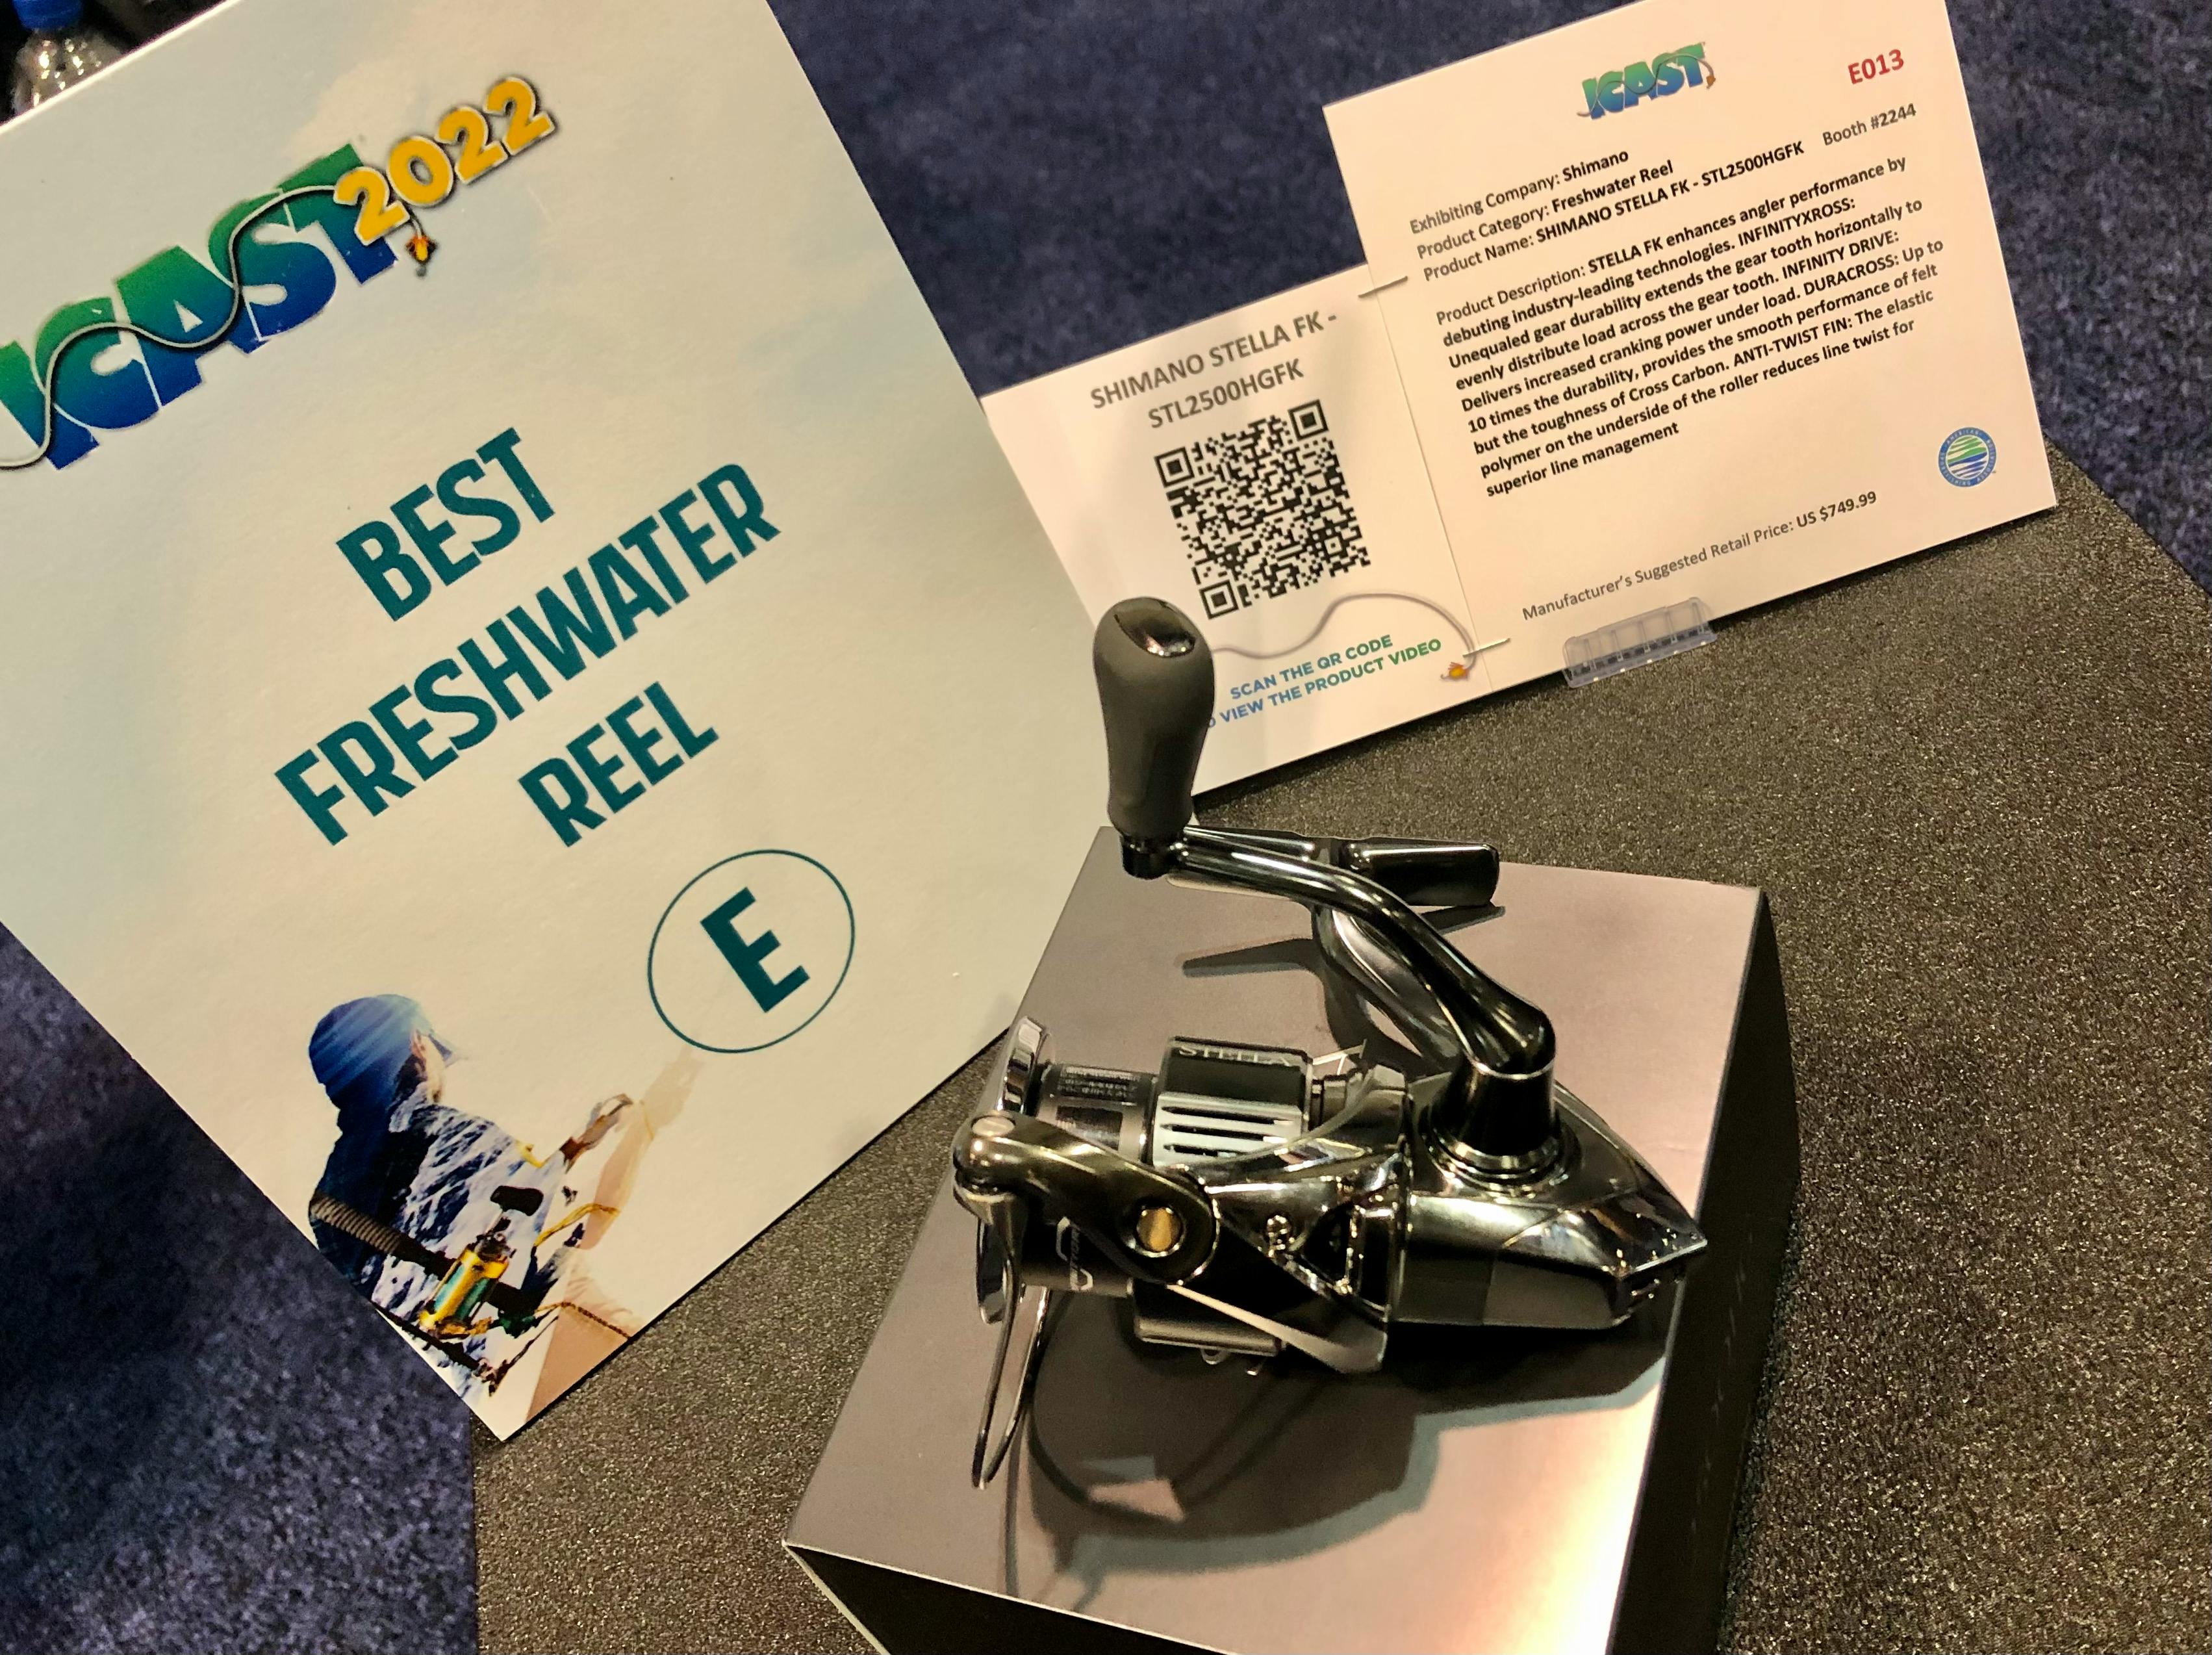 The Shimano Stella FK spinning reel on display at ICAST 2022